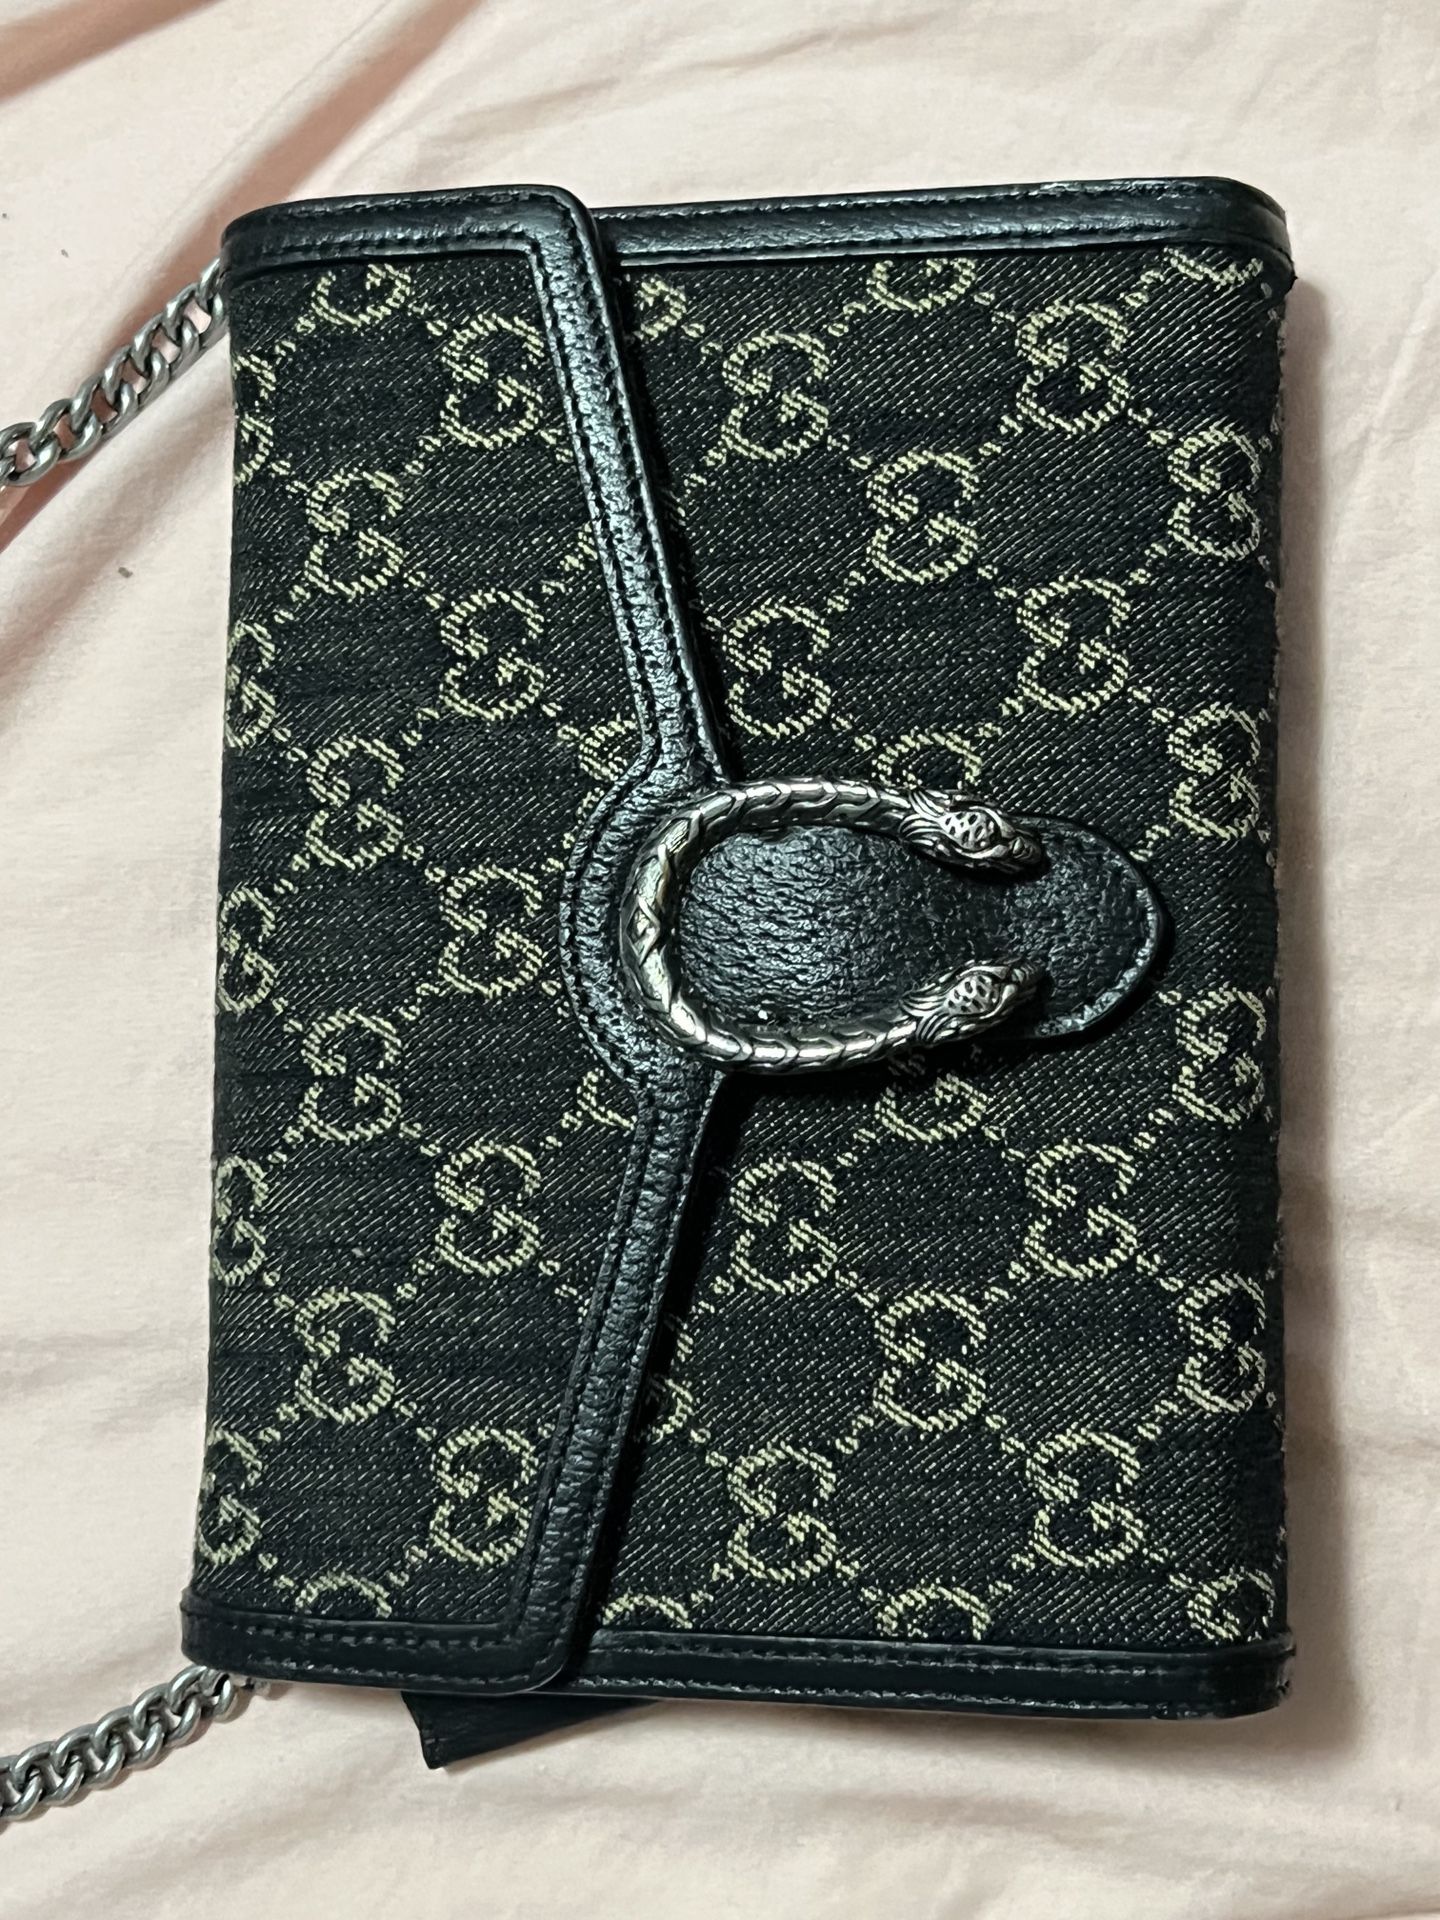 Guccis Cross Over Bag